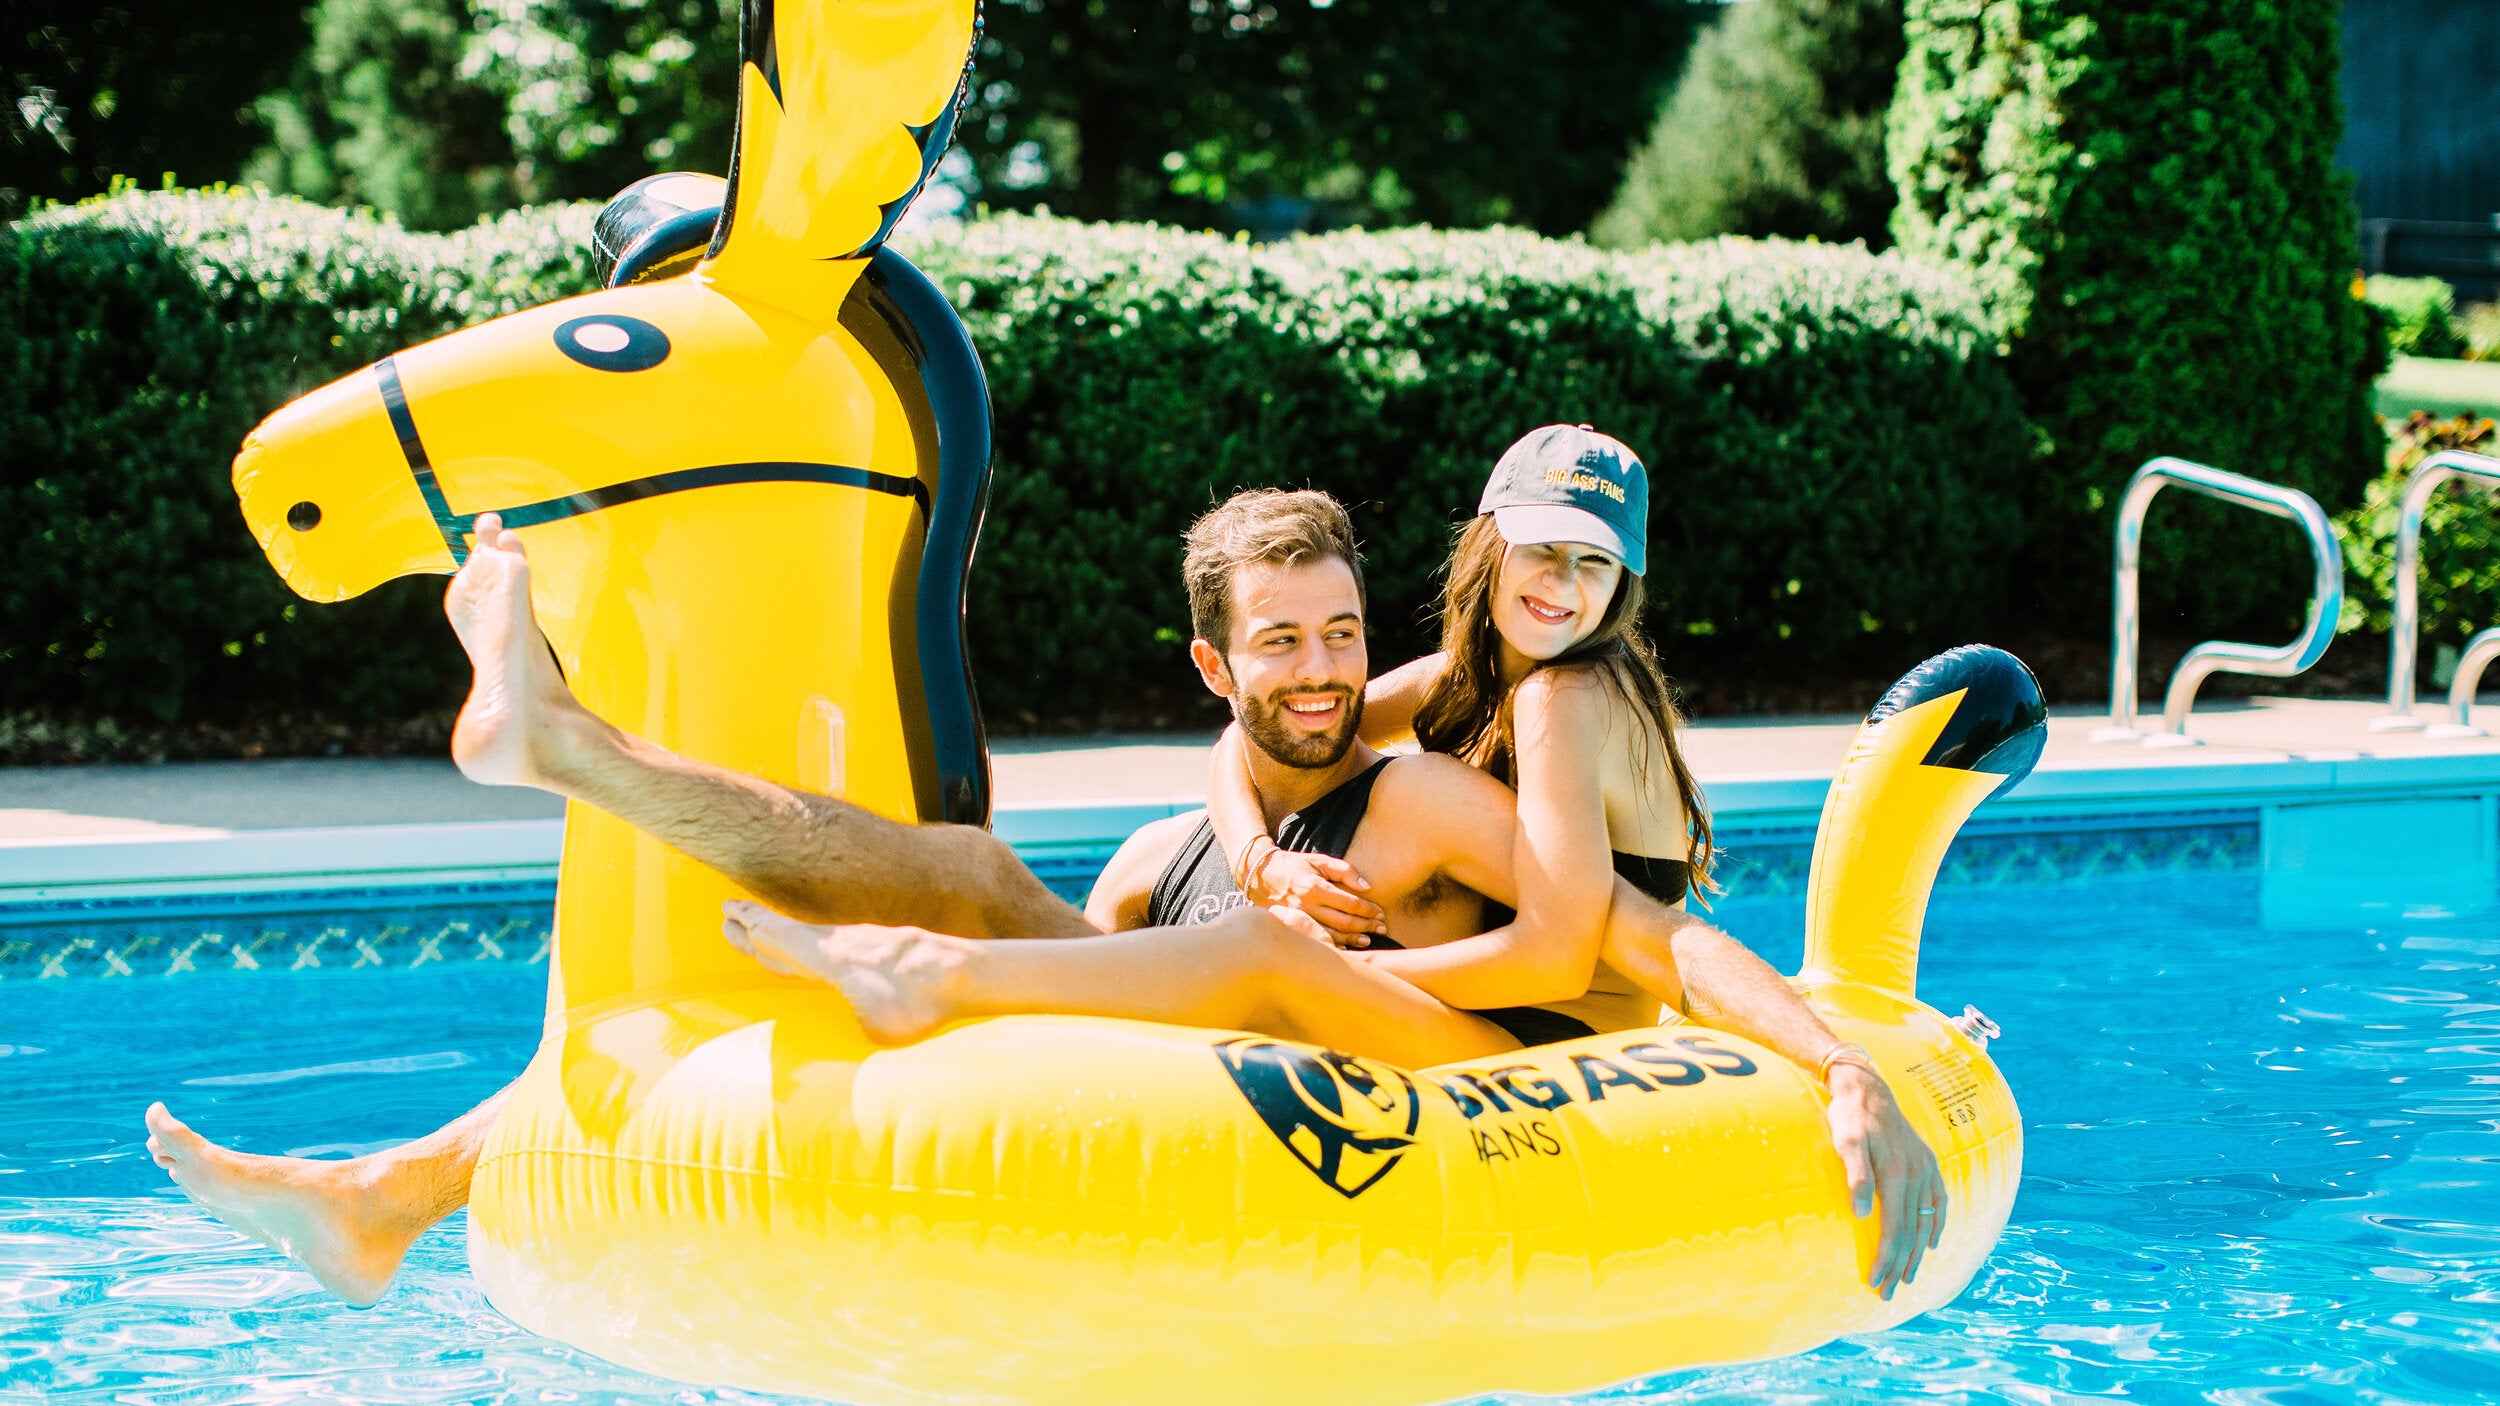 Custom Pool Floats  Design Your Own Pool Inflatables